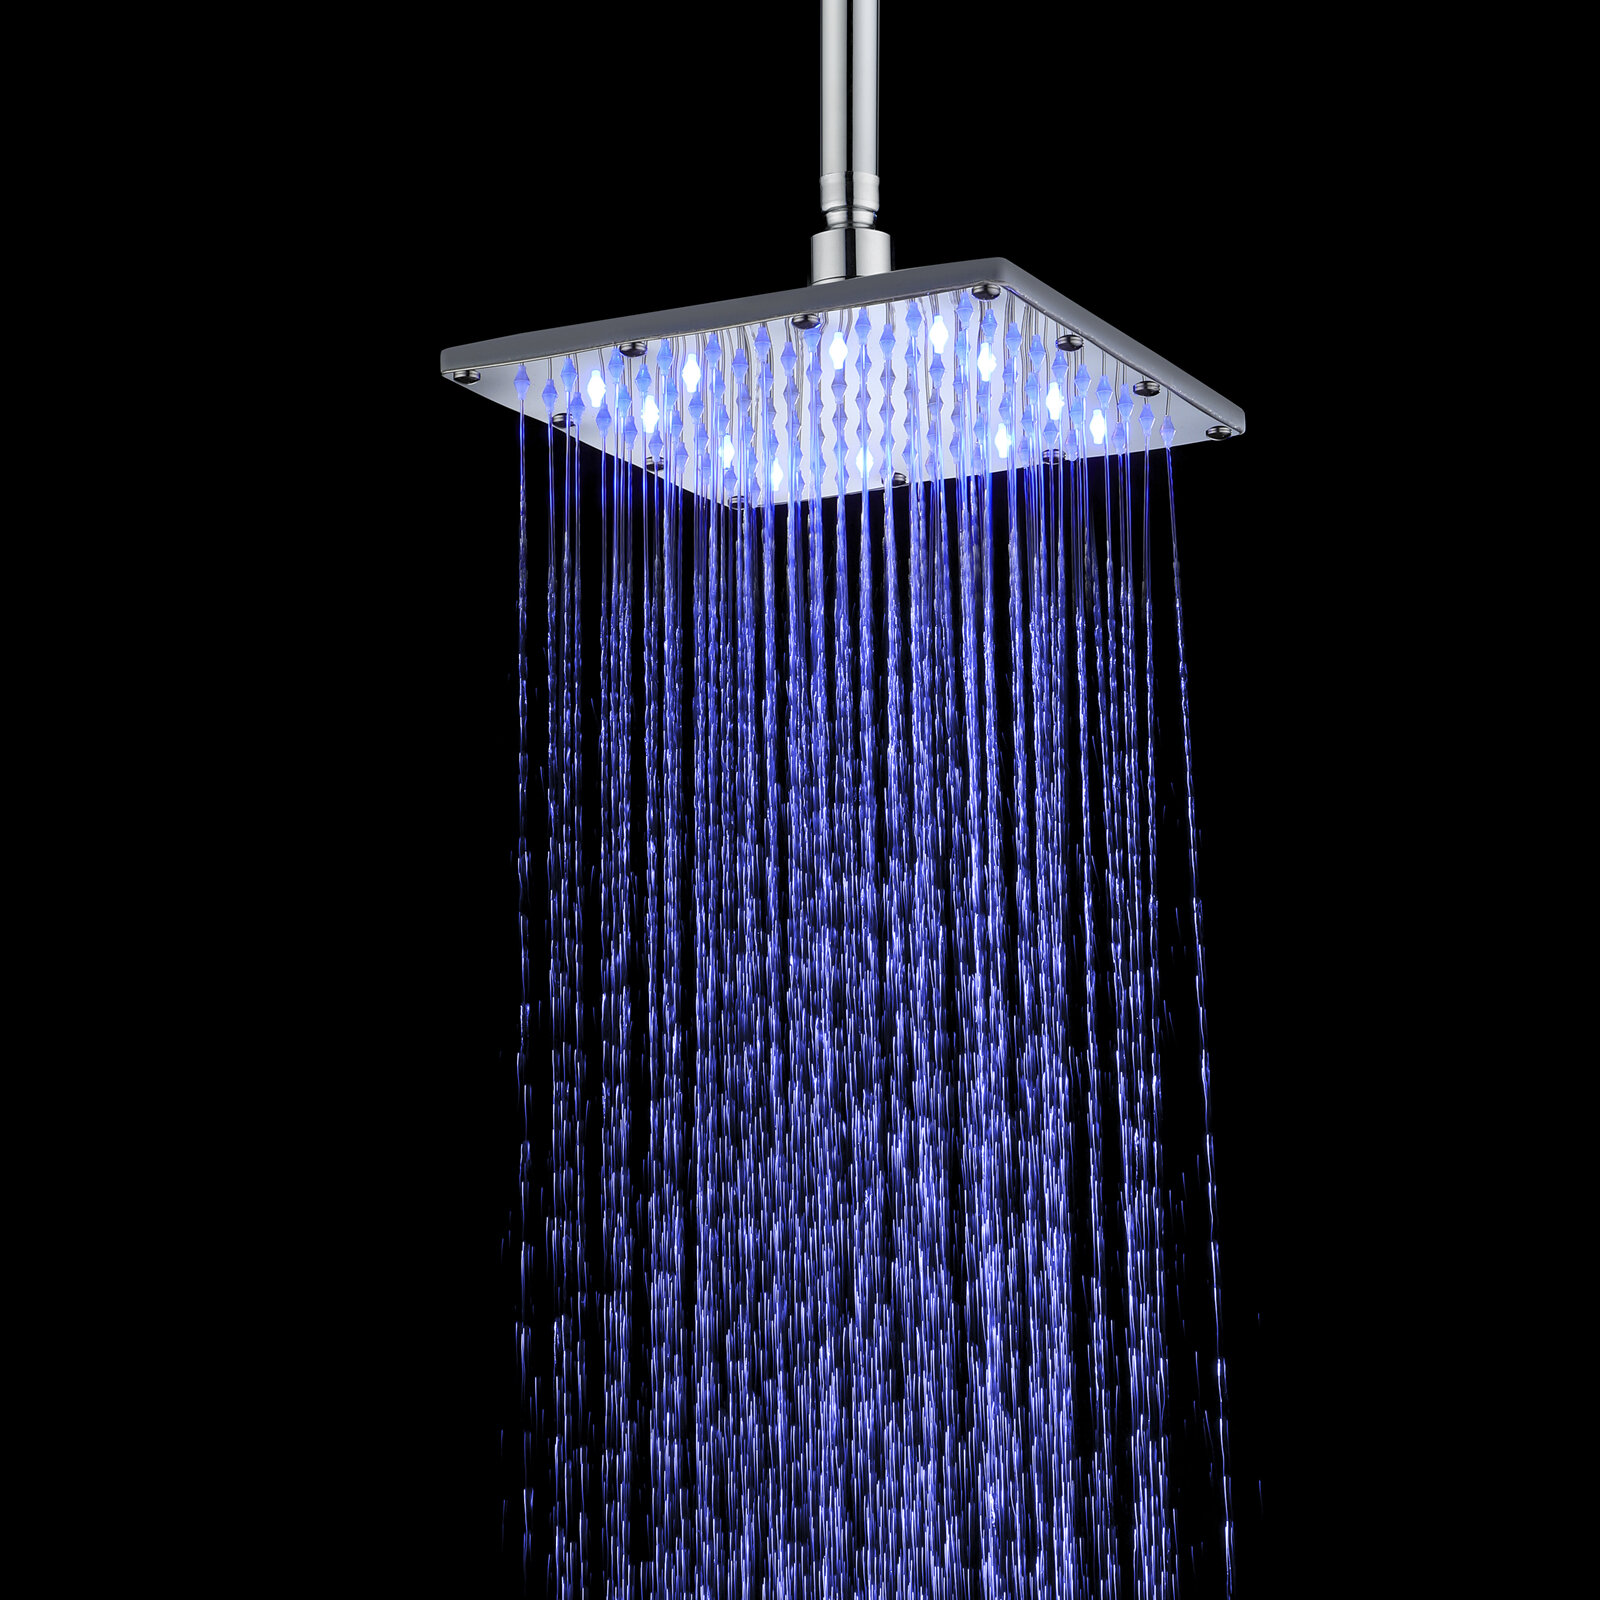 Fremmed vene Ruckus Supersonic Heuer Rain Fixed Shower Head 2.5 GPM GPM with Temperature-based  LED Lights & Reviews | Wayfair